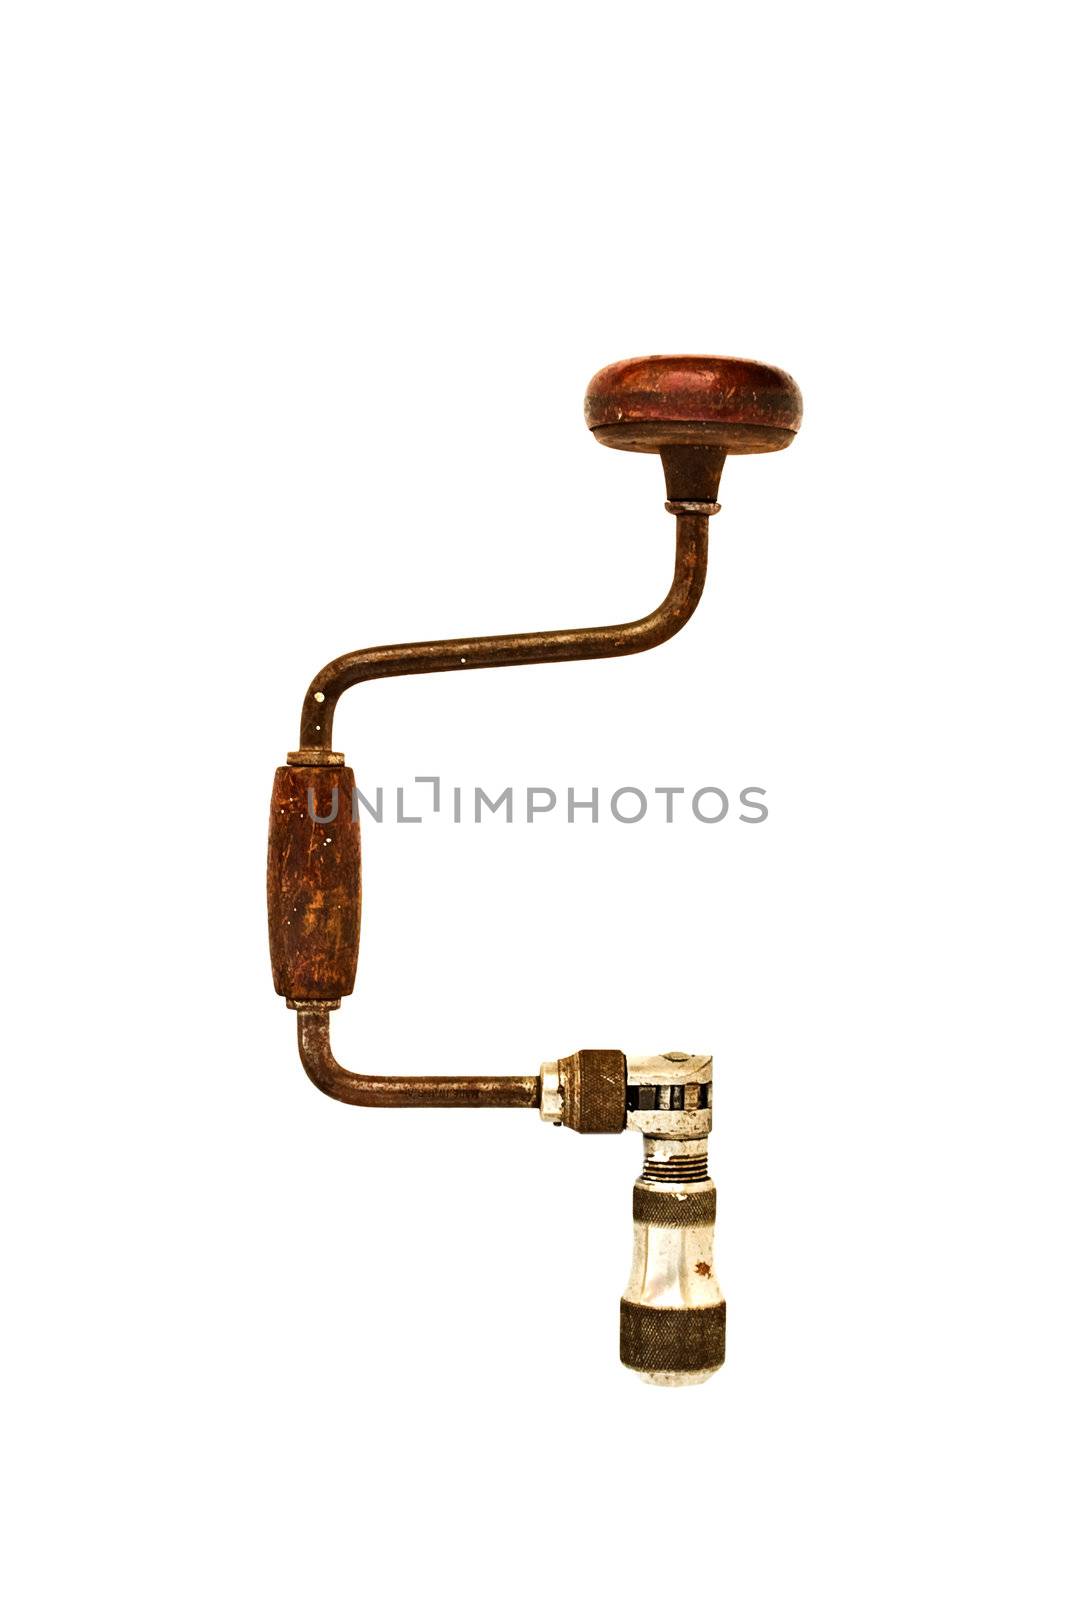 An antique wood drill brace isolated on a white background.
